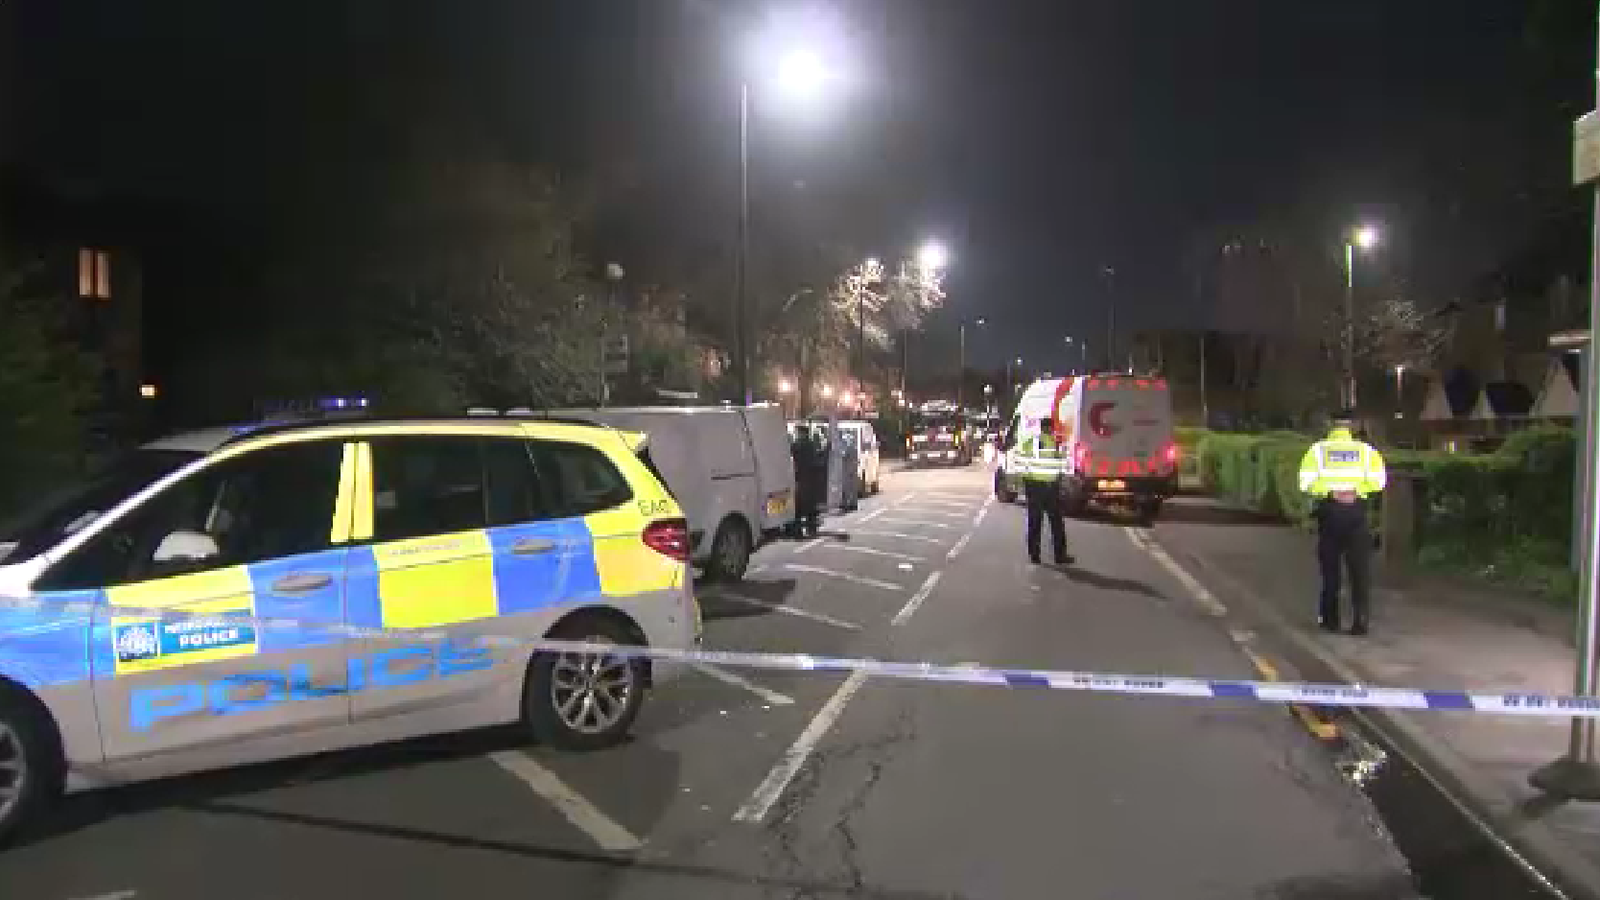 Man arrested on suspicion of murder after woman dies in fire in Beckton, east London